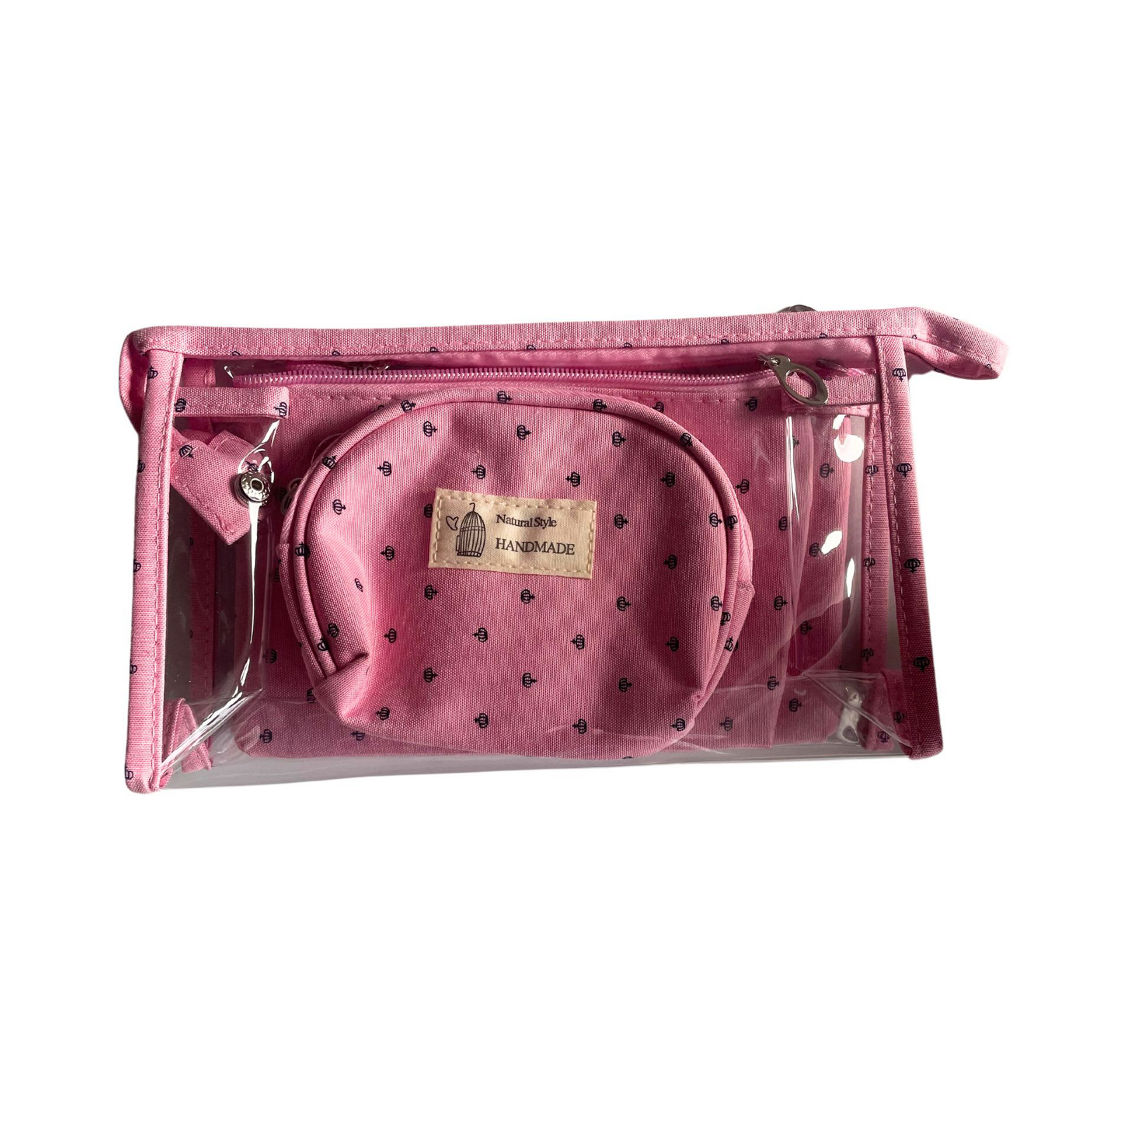 Genovie MD Clear Pink Makeup and Skincare Toiletry Bag for Women, 3 Piece Set - Image 2 of 5